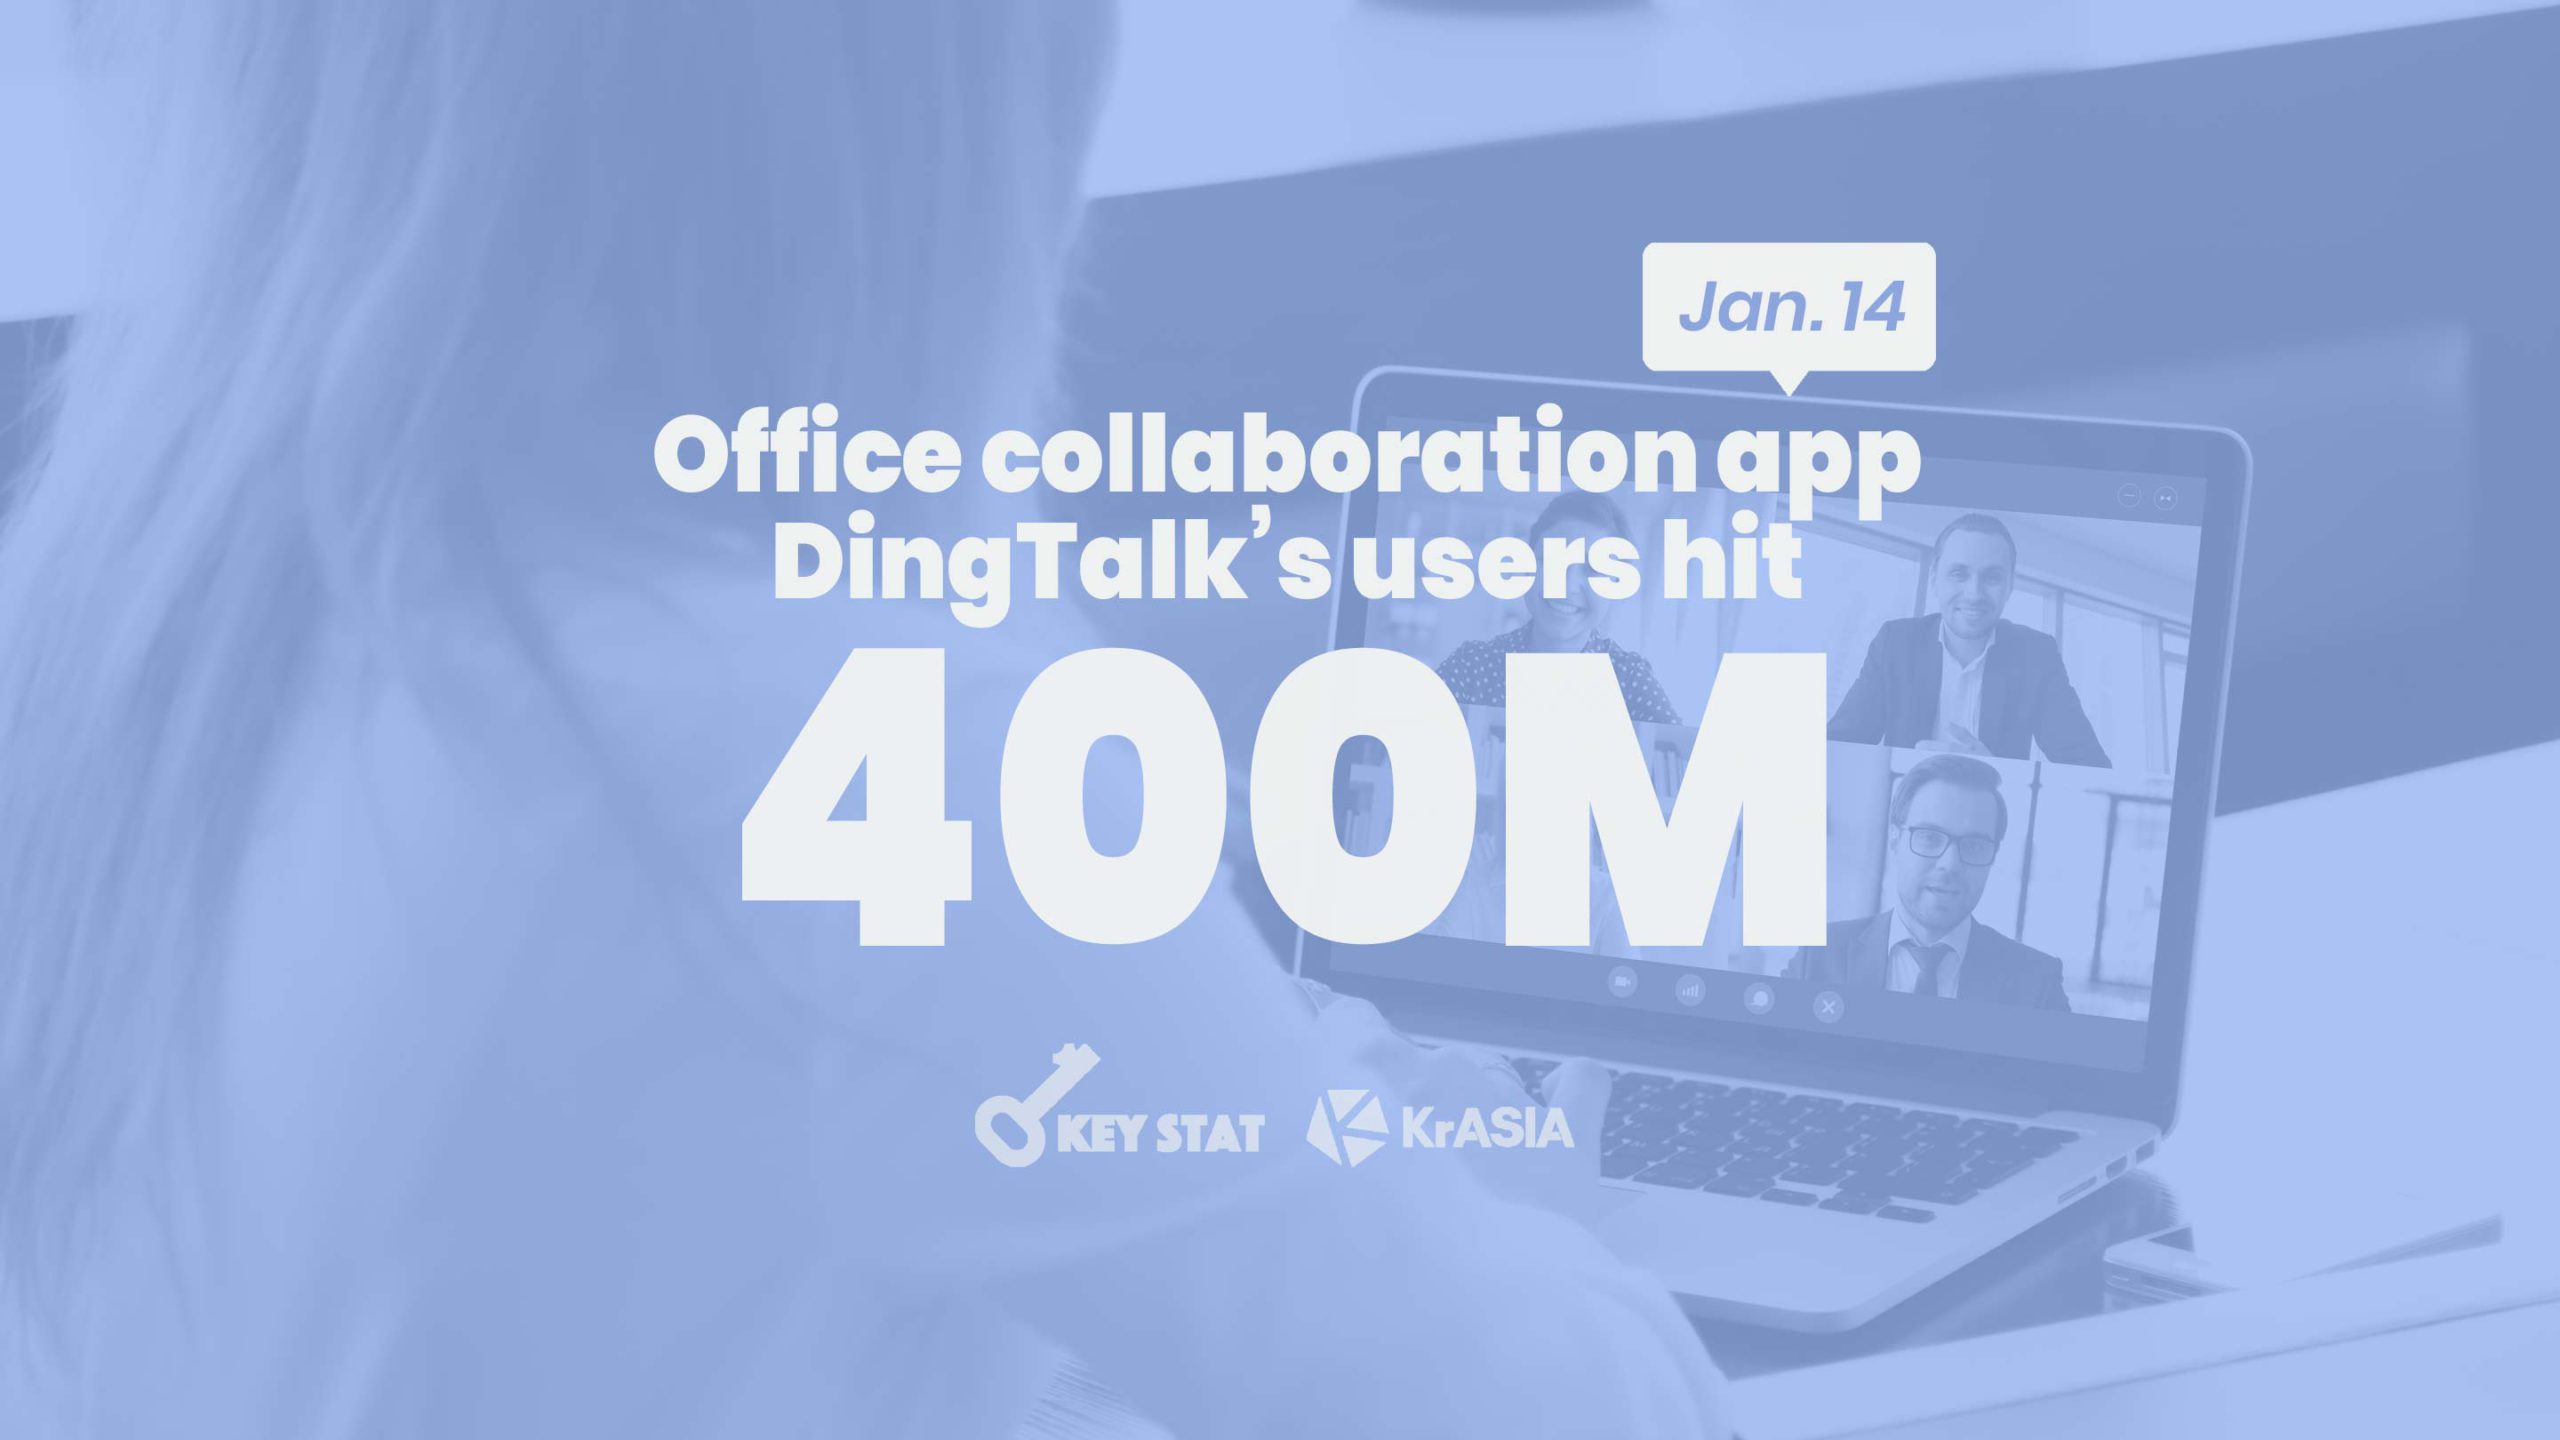 KEY STAT | Alibaba’s workplace messaging app reaches 400 million users